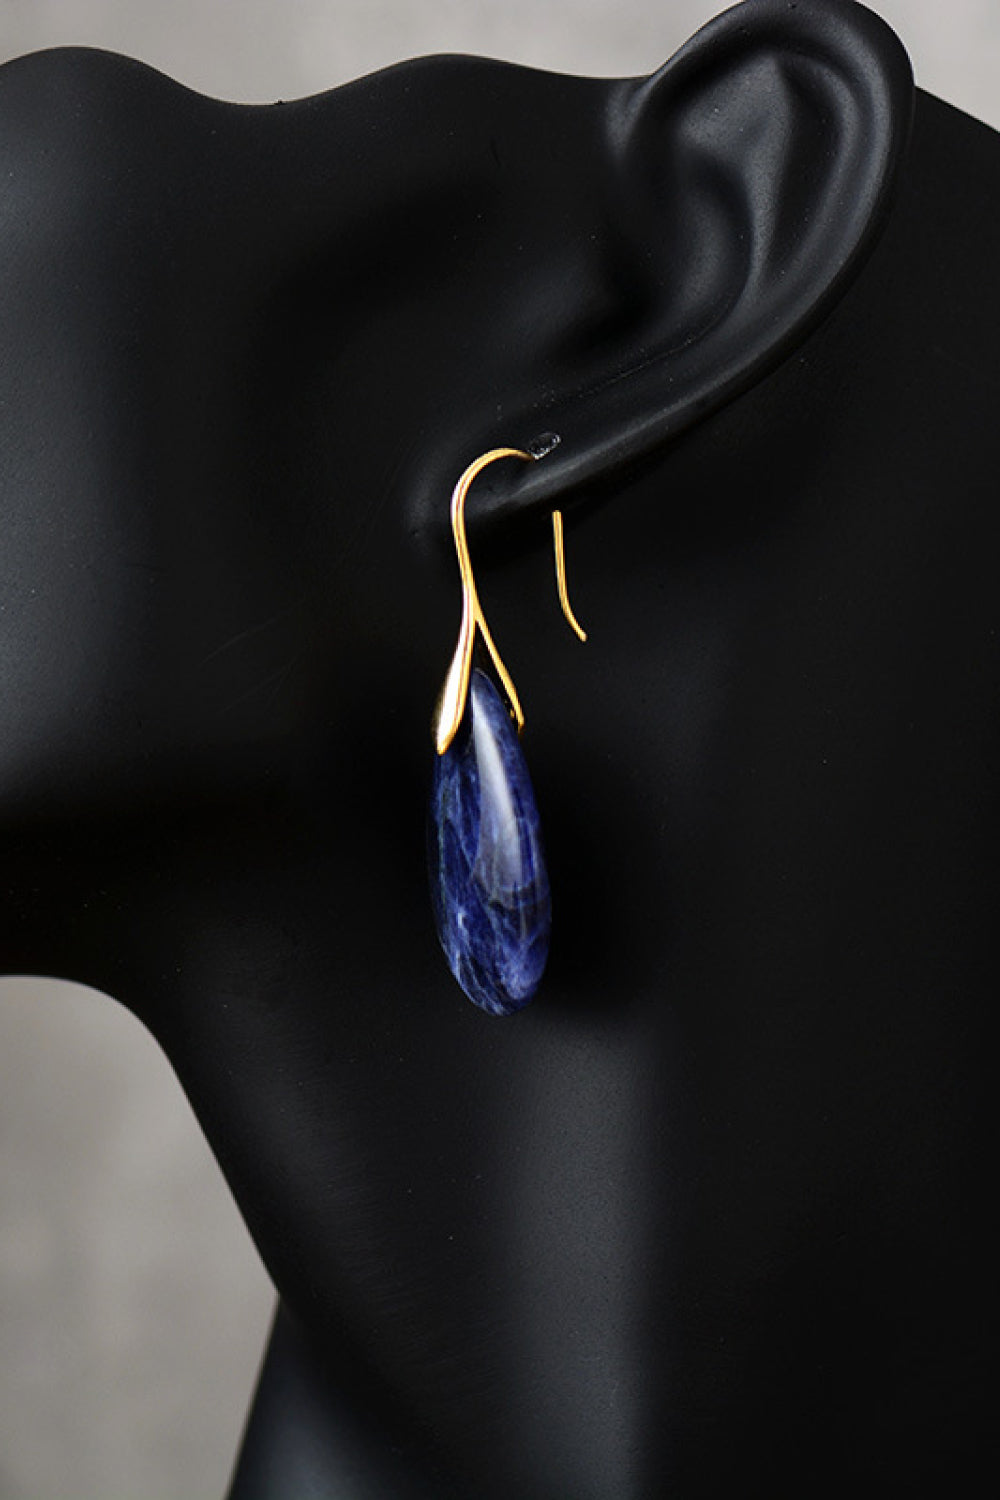 Natural Stone Teardrop Earrings Additional Options Available